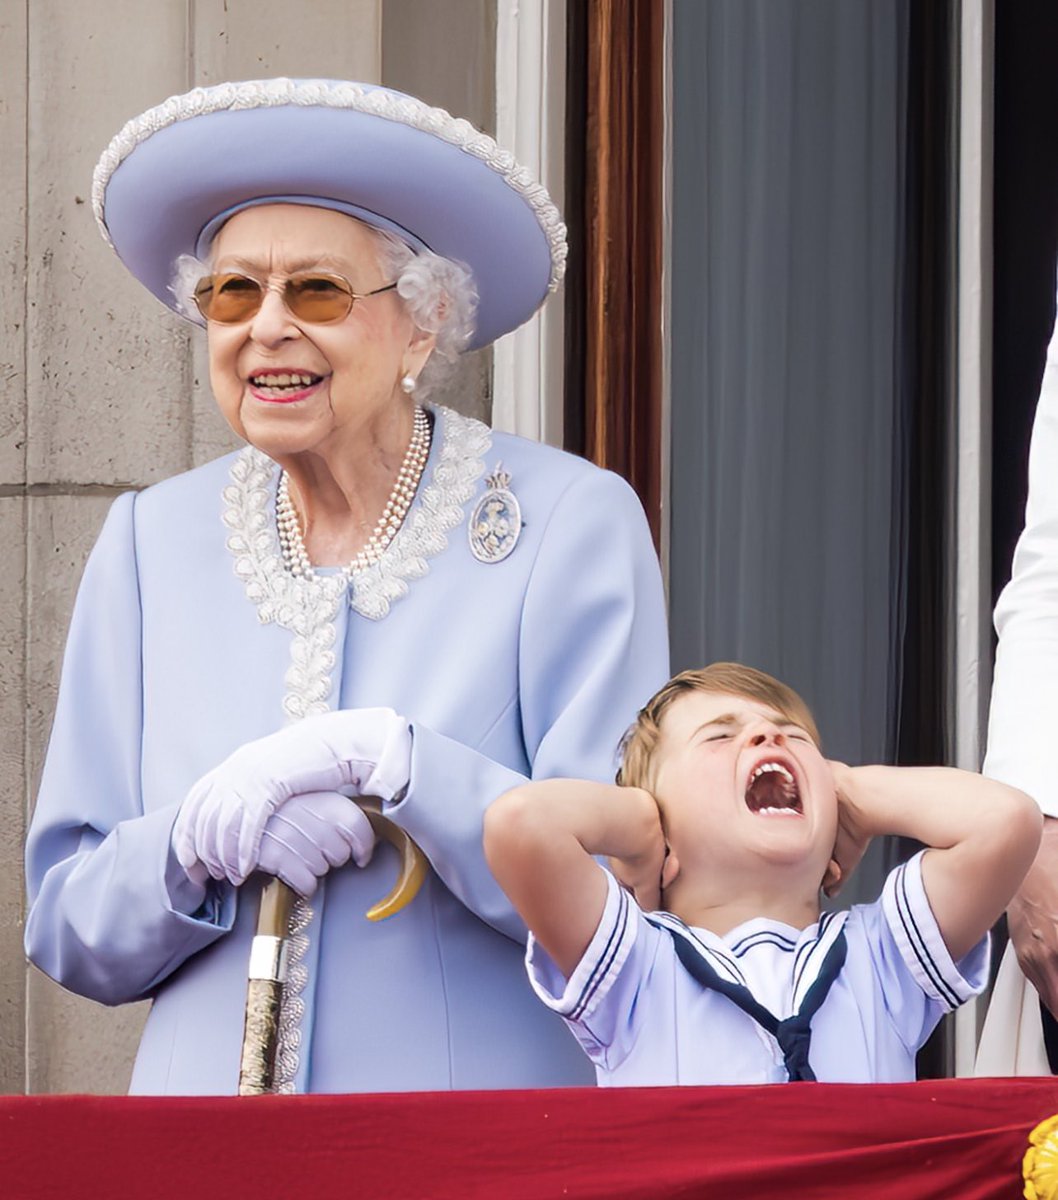 Really happy to have my photo of the Queen & Prince Louis nominated for Photo of the Year at the Picture Editor Awards. A real honour to be recognised amongst such stunning images. The winner is chosen by the public so would really appreciate a vote here: bit.ly/3YqXUMC